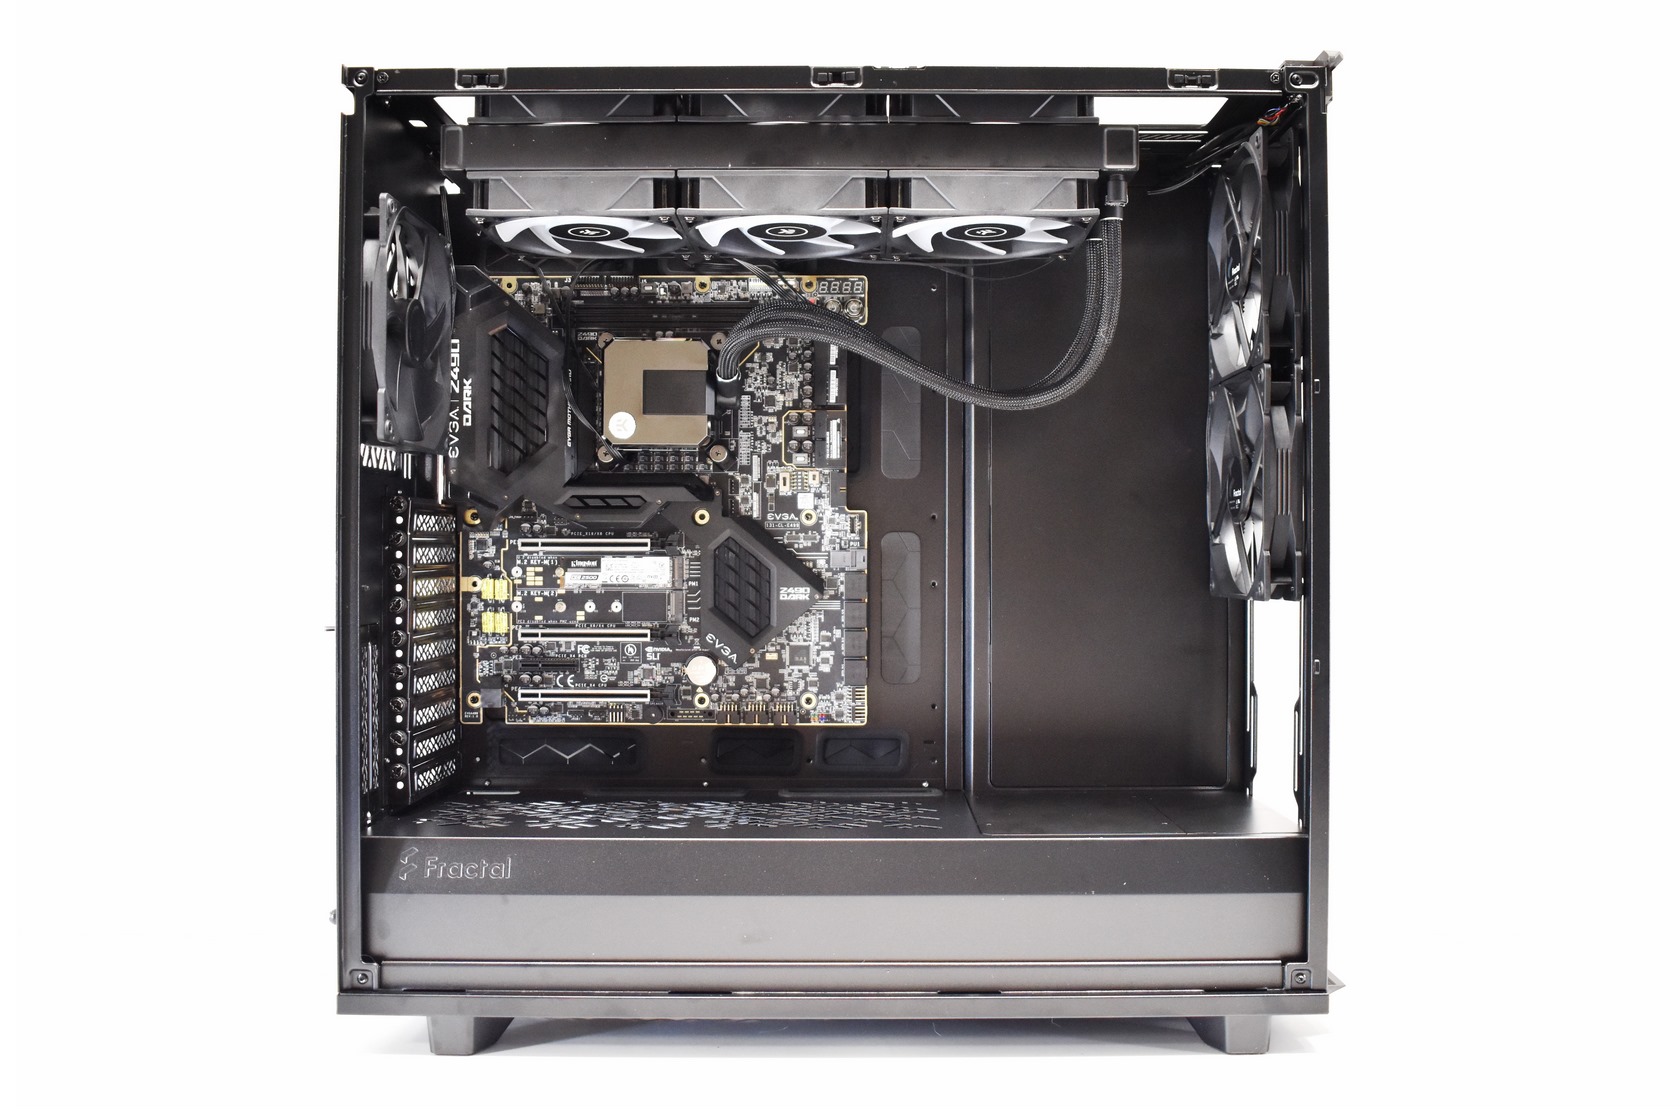 Fractal Design Meshify 2 Compact Reviews, Pros and Cons